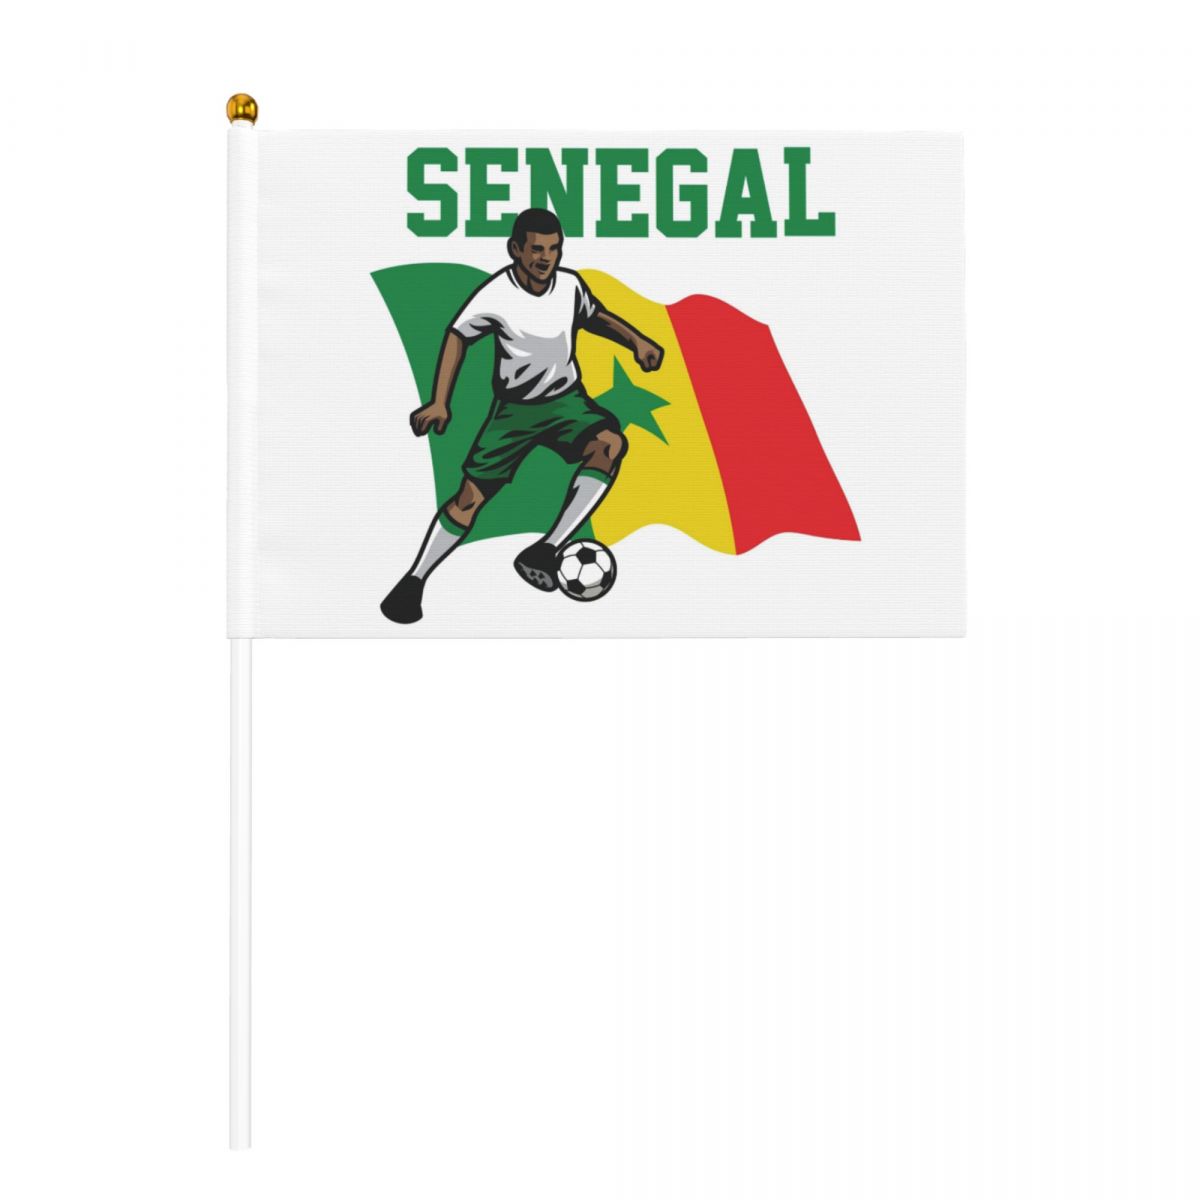 Senegal Soccer Player Hand Held Small Miniature Flags on Stick